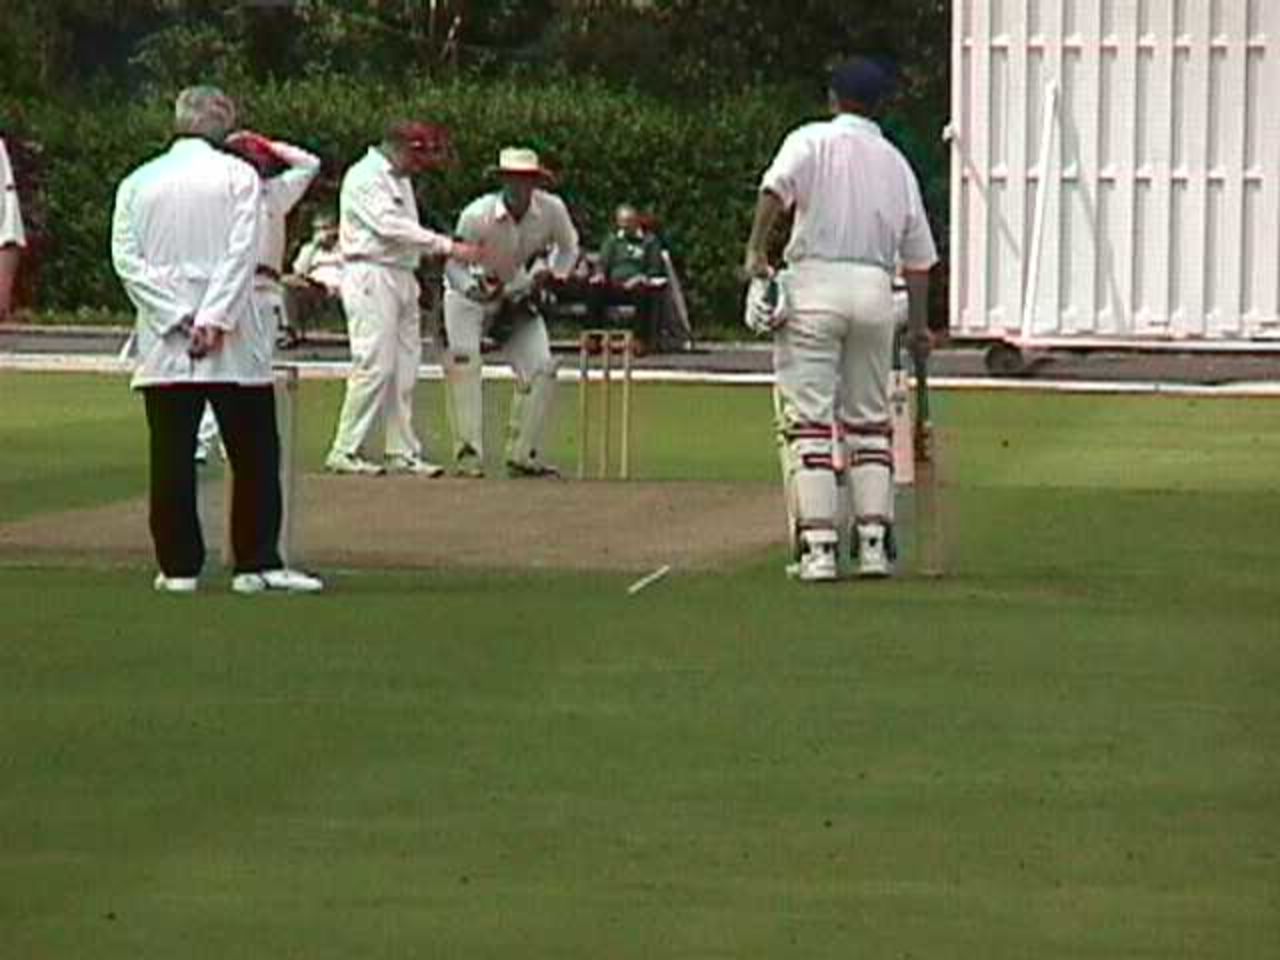 Haslingden fielders inspect the timbers after Stuart Priestley's amazing early escape